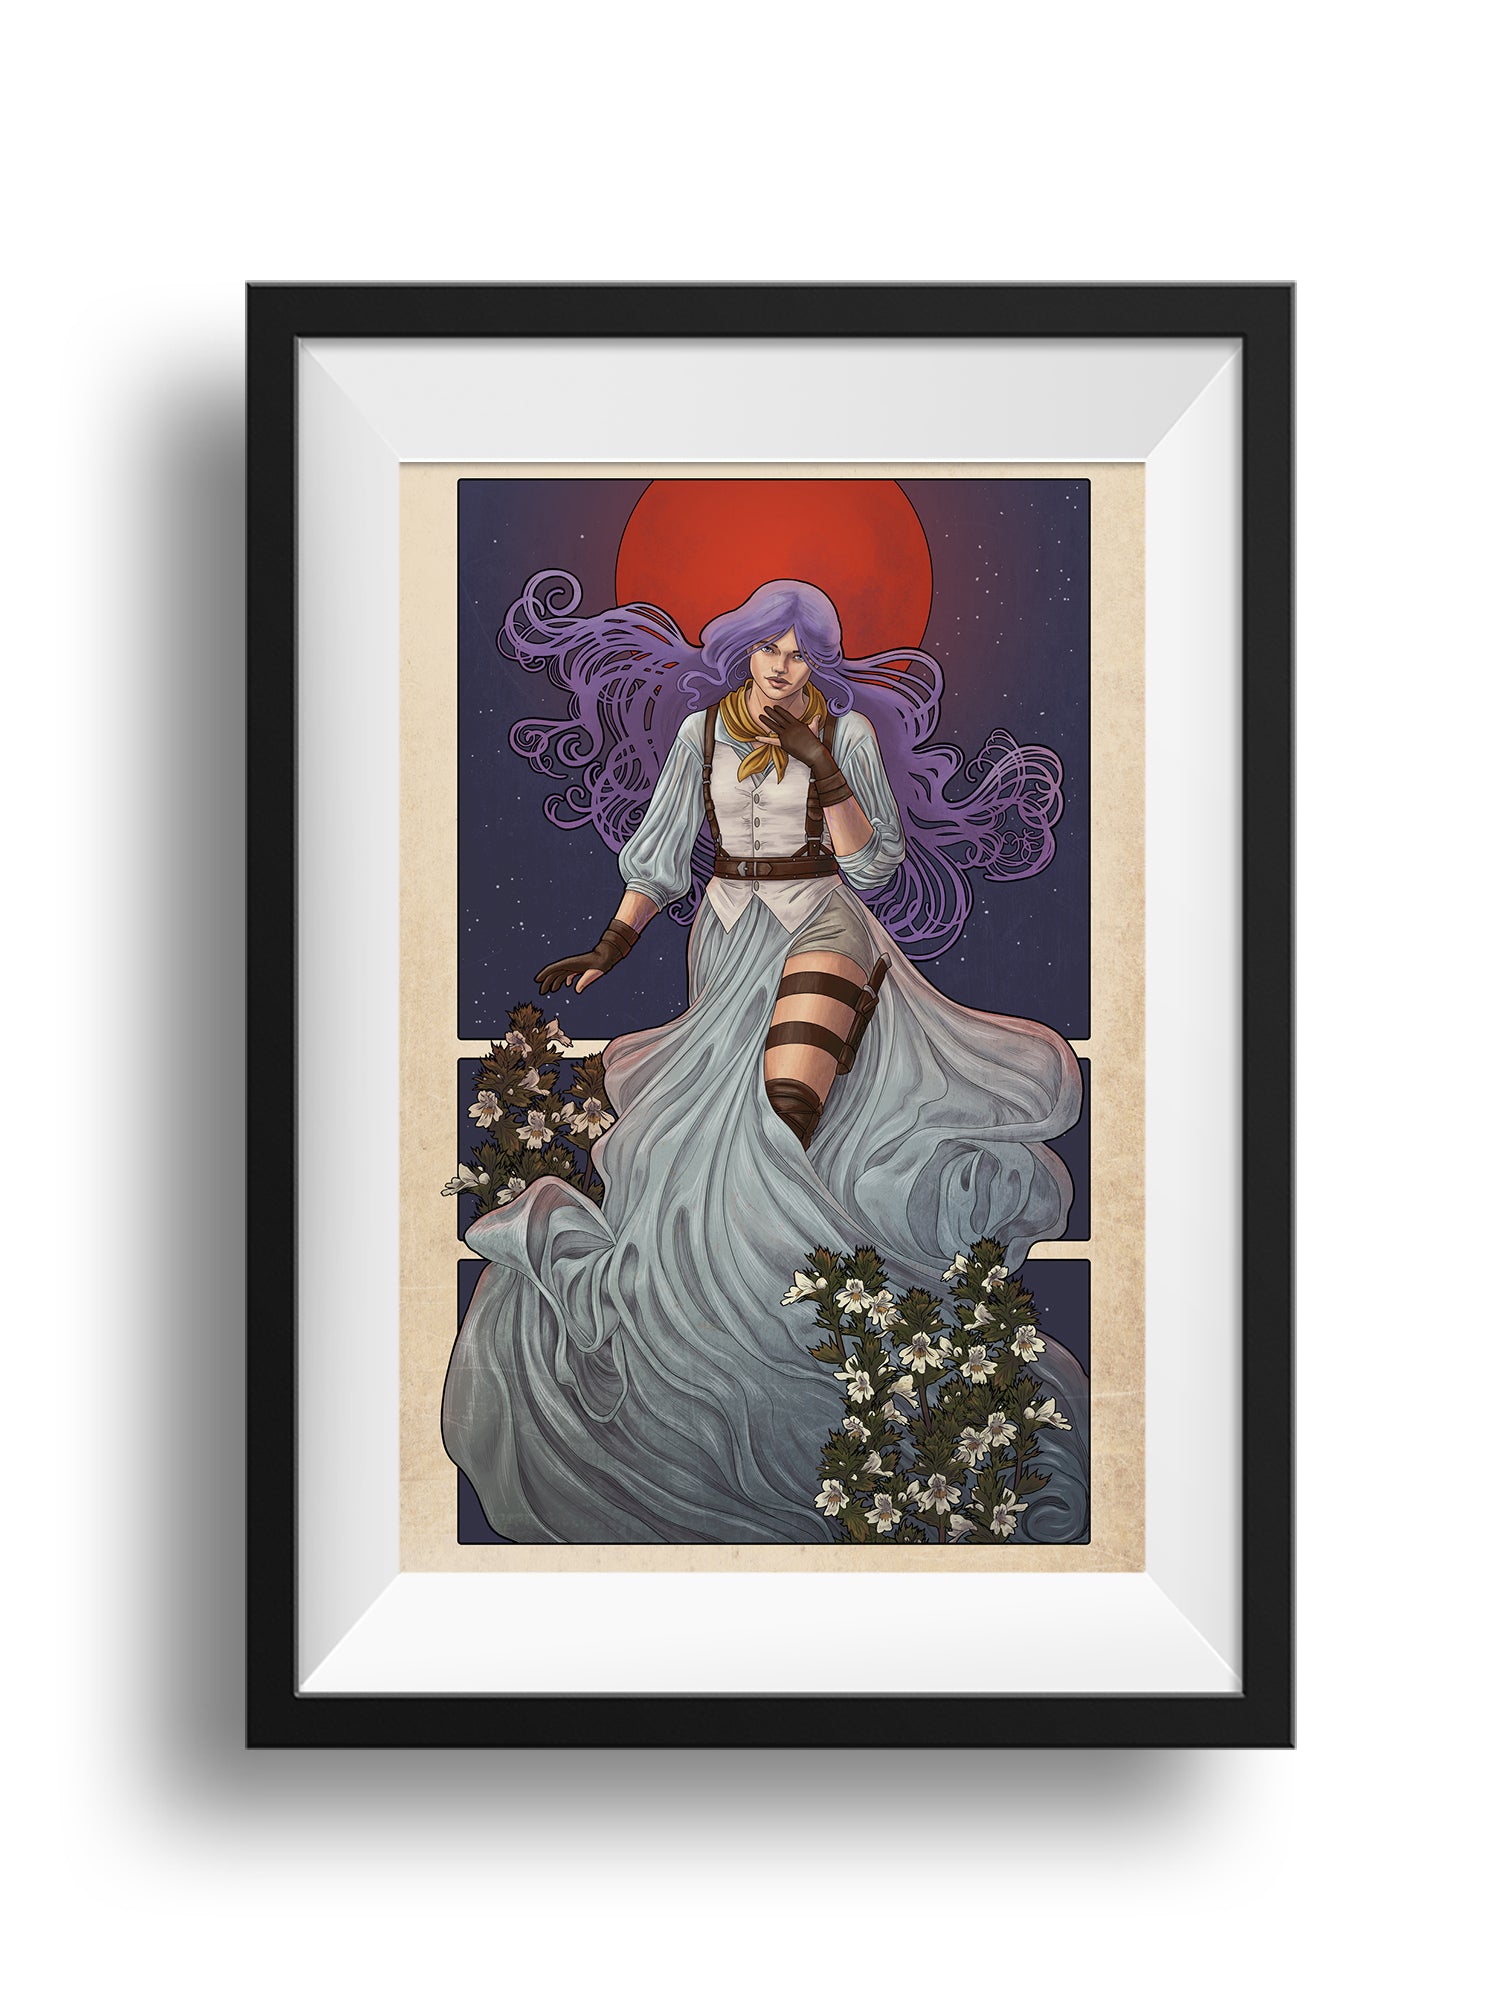 A framed print of Imogen floating before a red moon. Her hair drifts off, and skirts drape around her legs. Eyebright flowers decorate both sides.